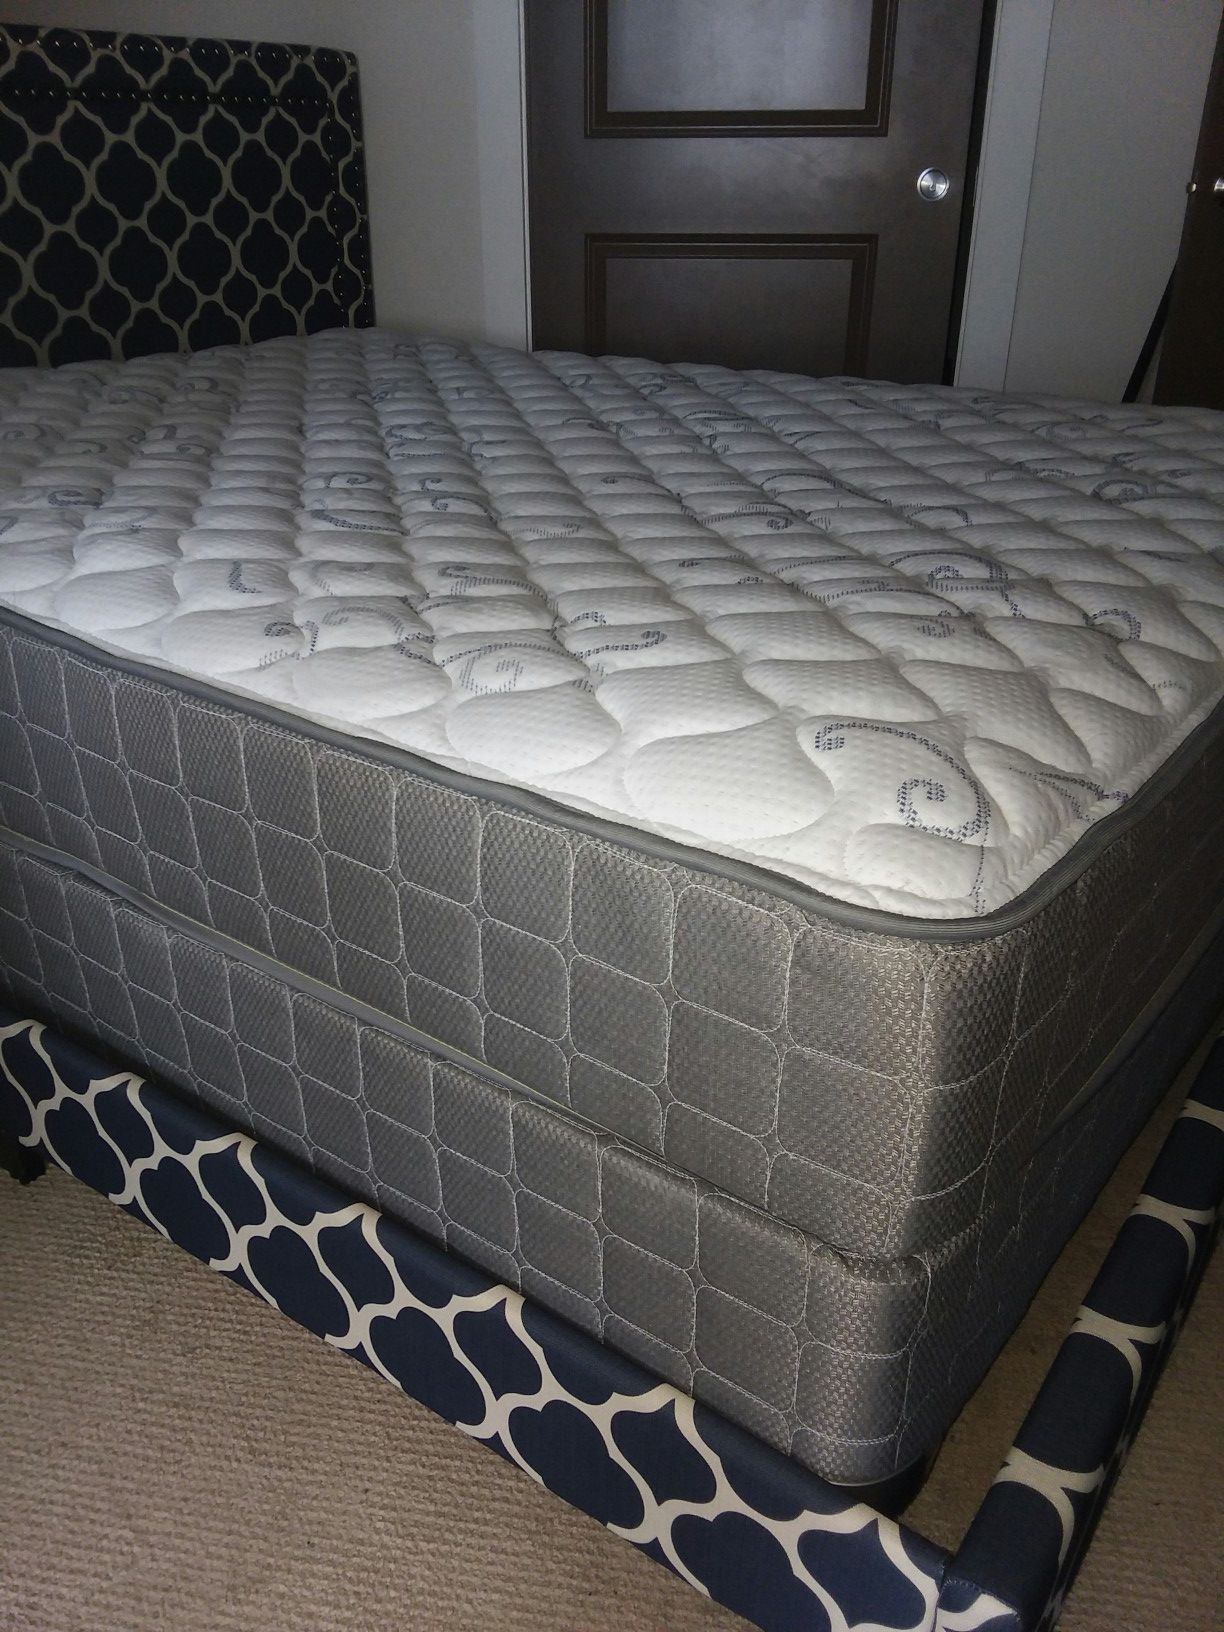 Brand new Full mattress and box spring sets or separately